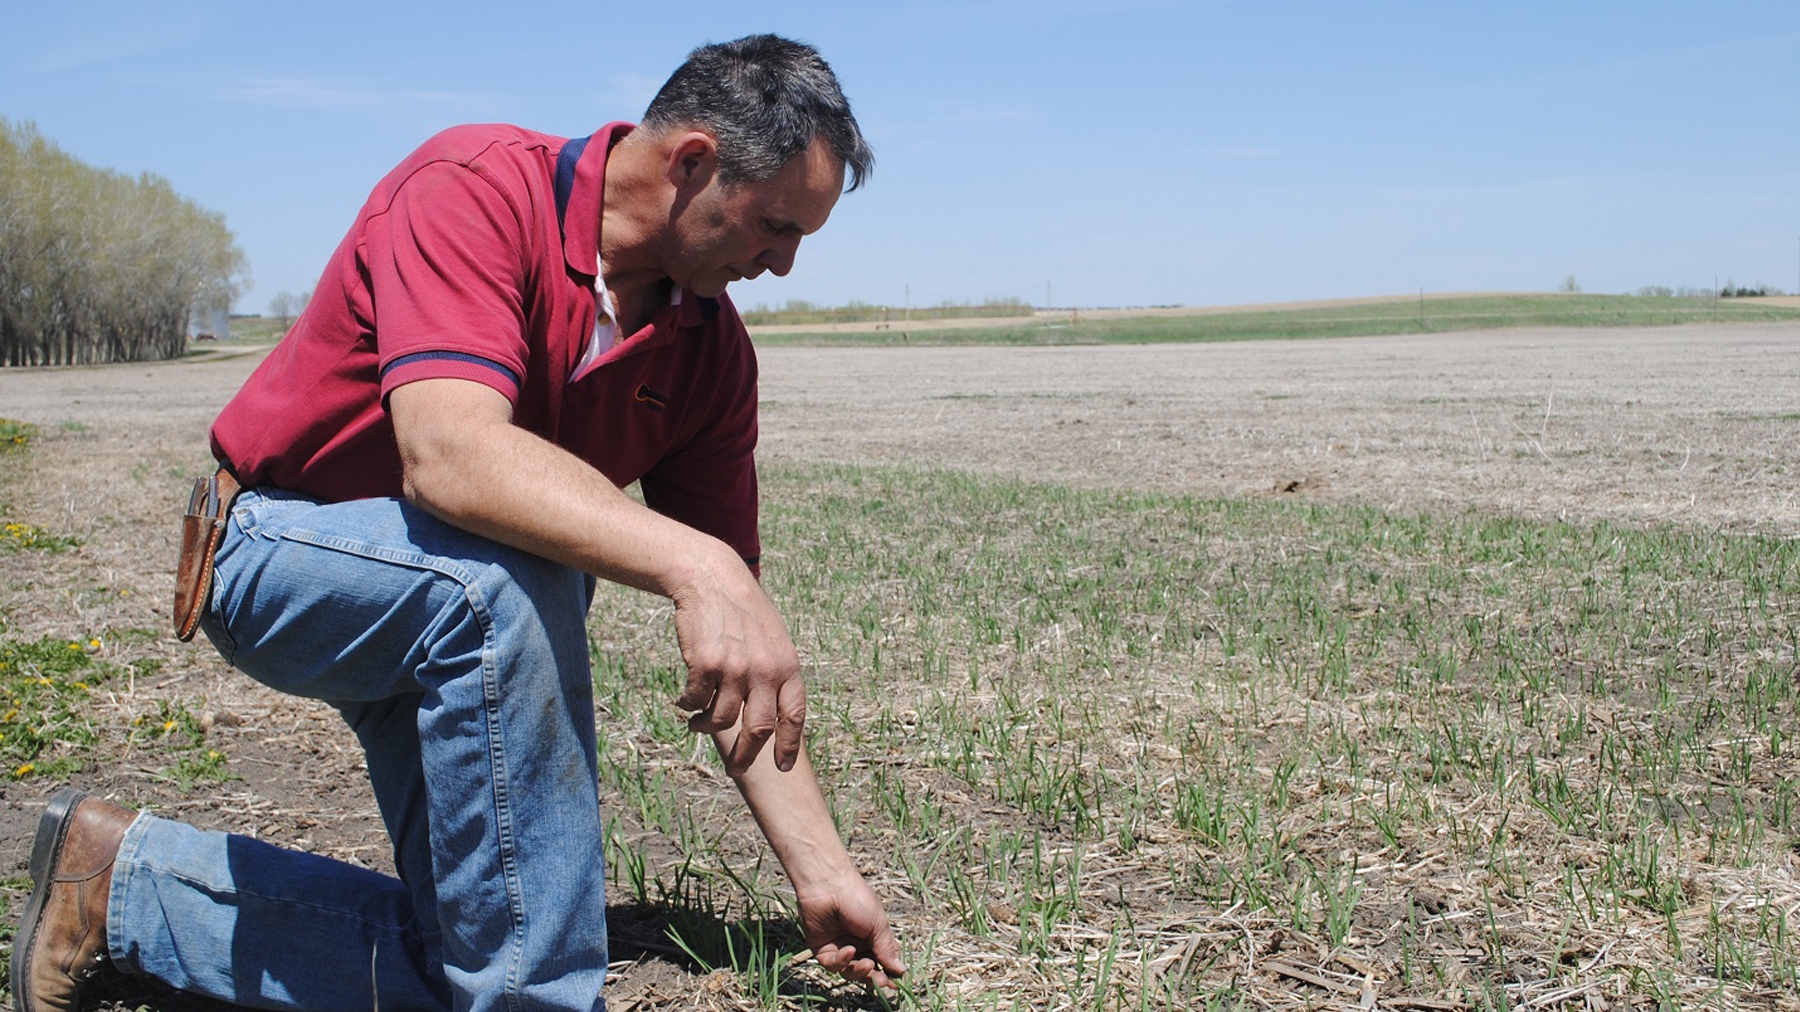 Steffen kneels near his unofficial oat variety trials, inspecting germination on various varieties in a field.